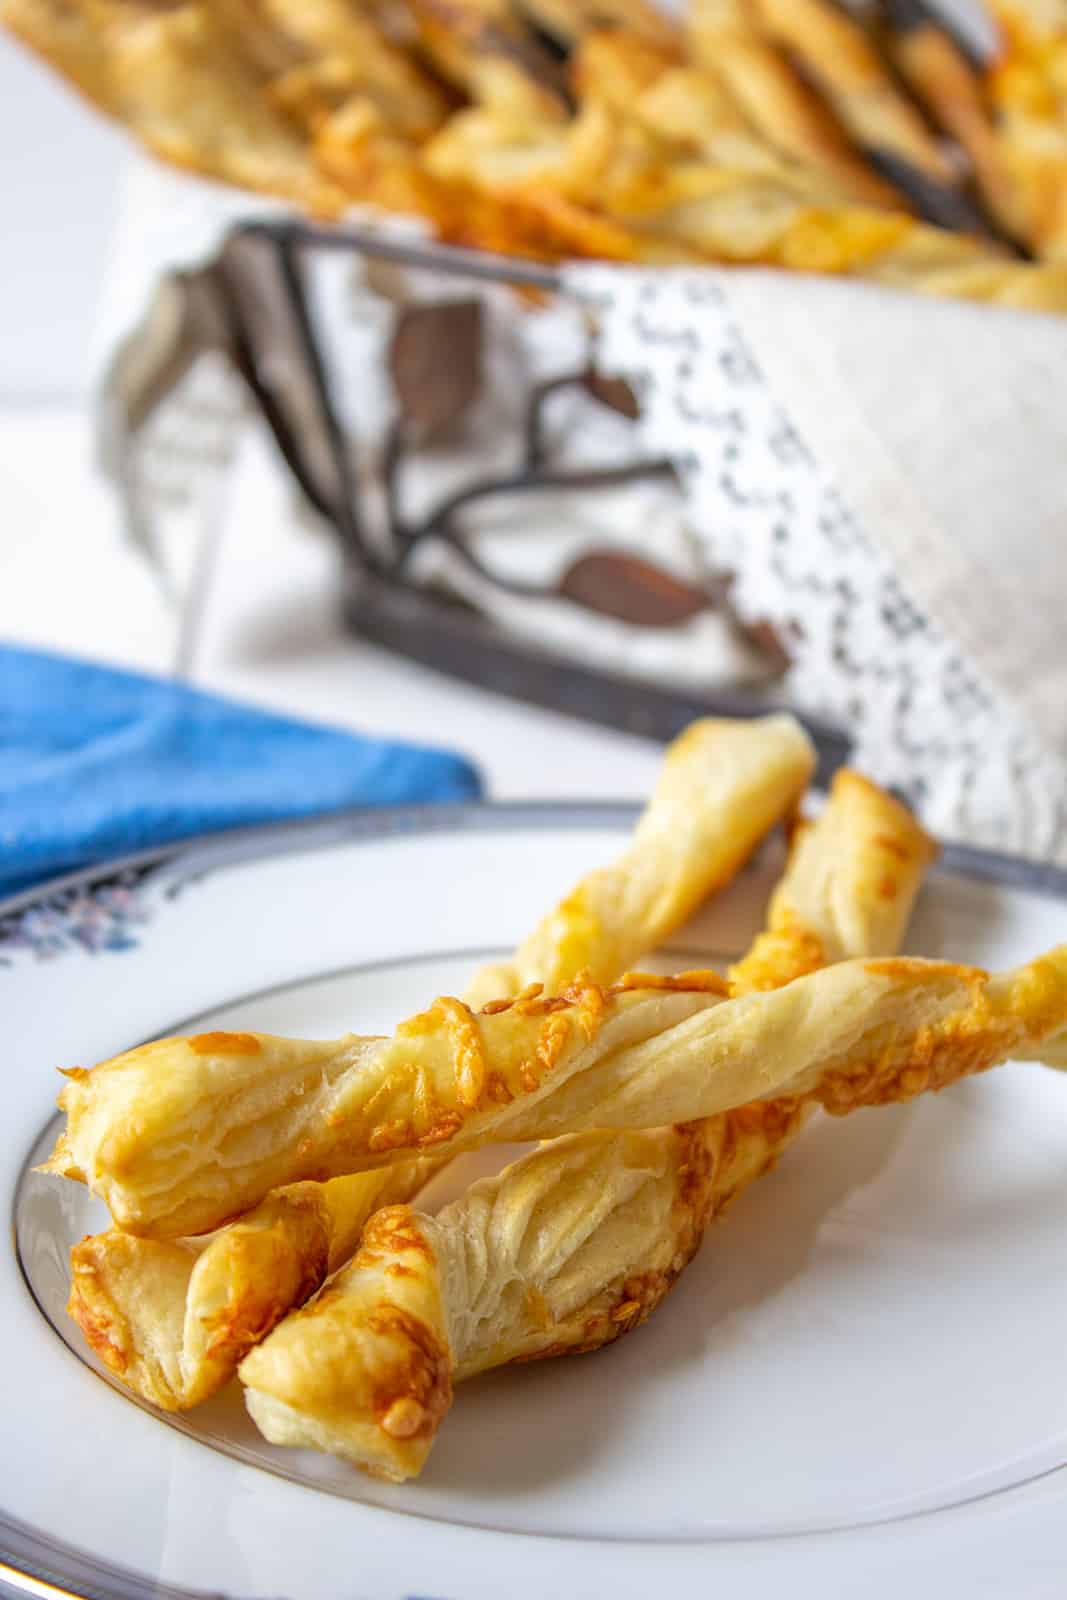 Three cheese straws on a small white plate.